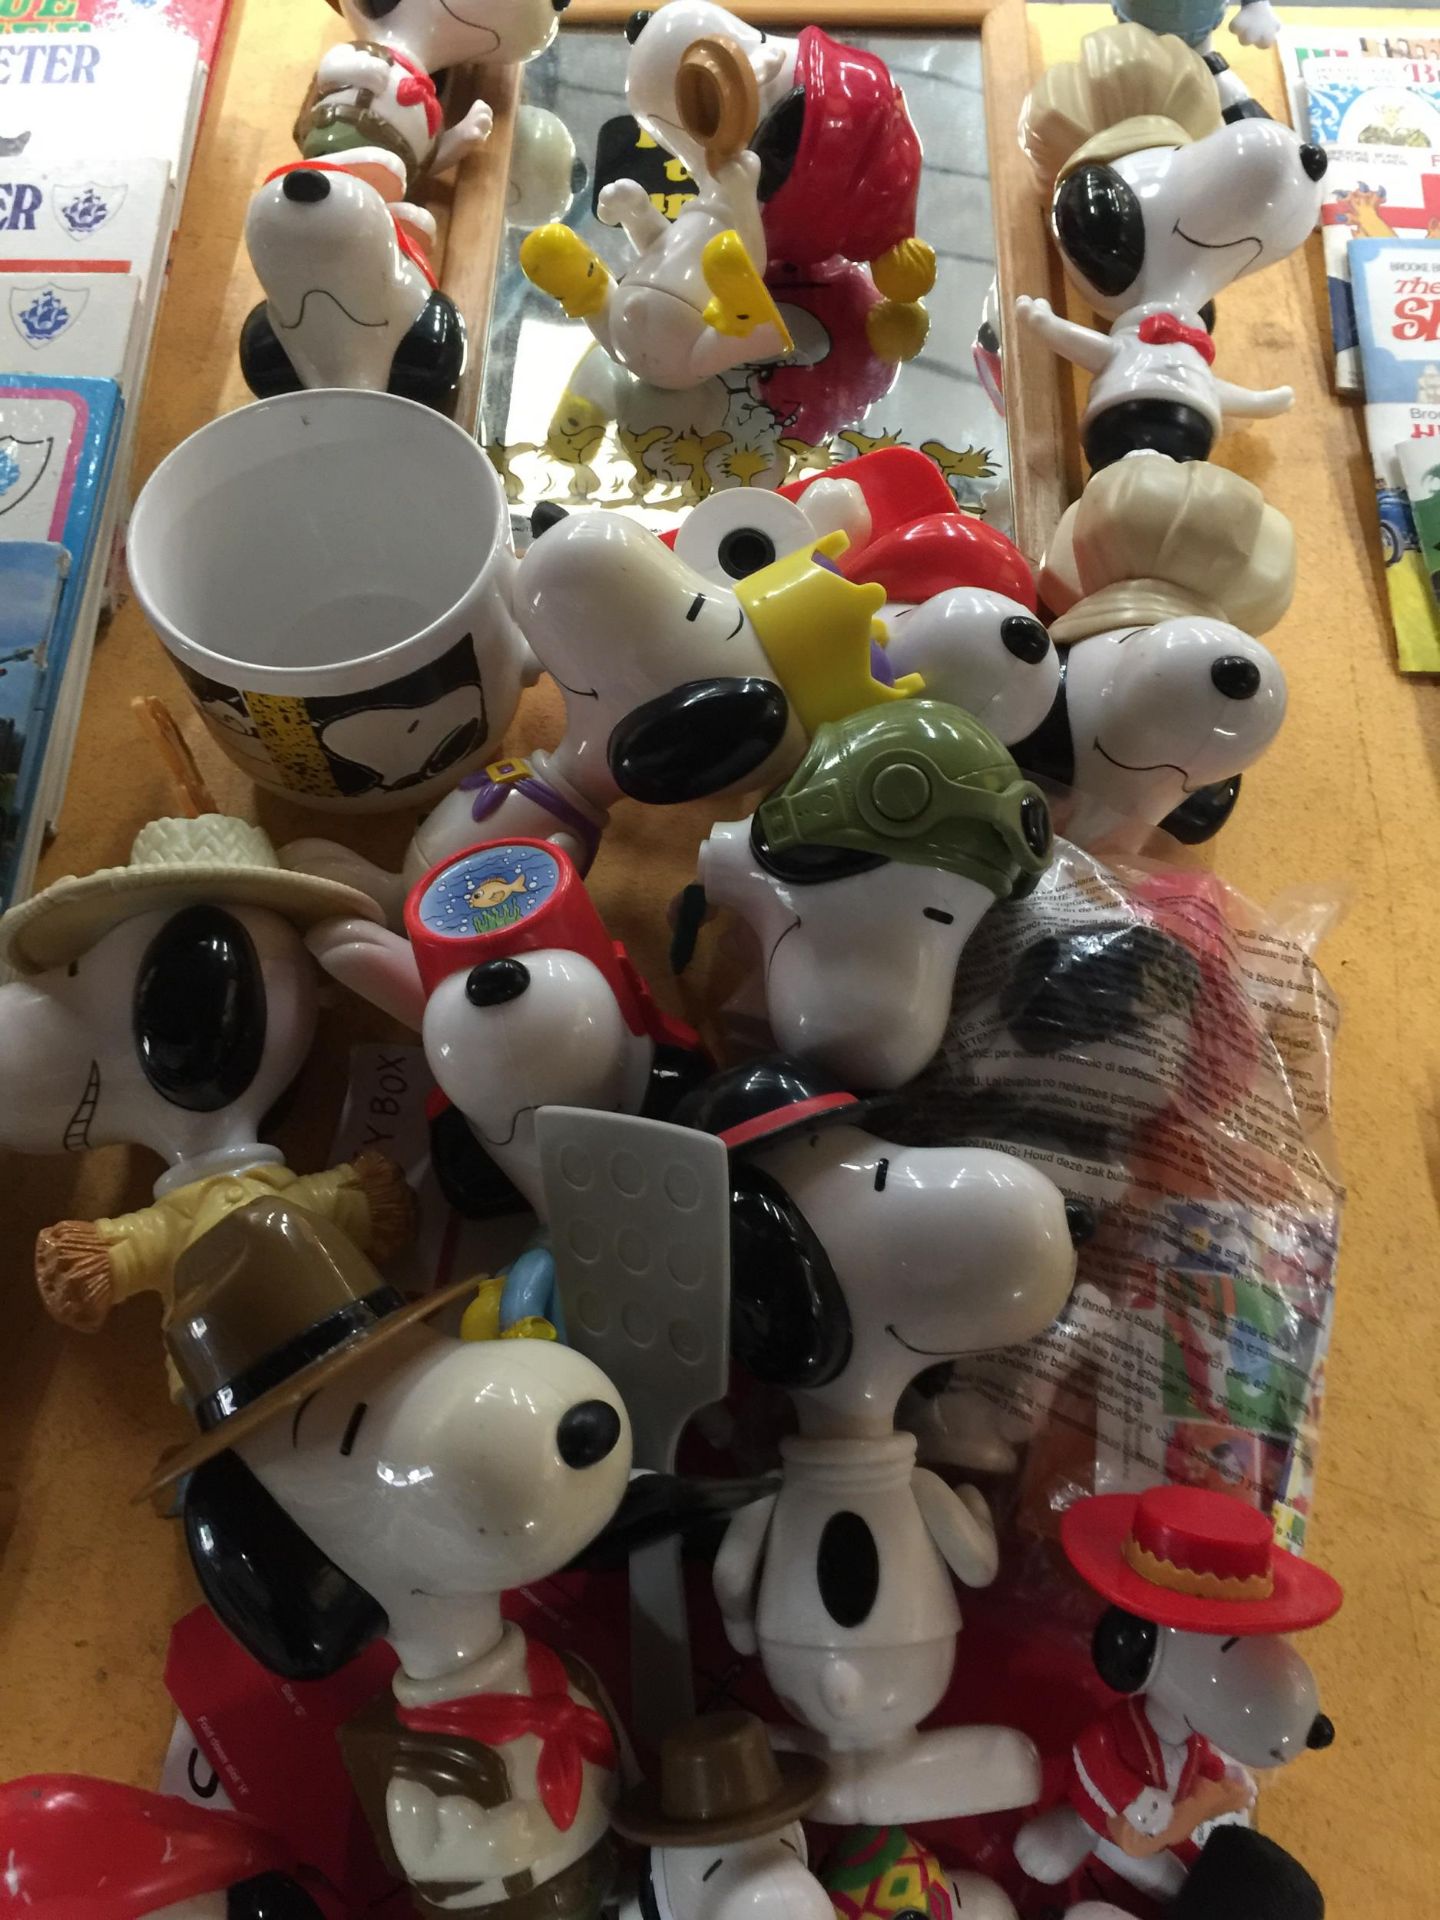 A COLLECTION OF SNOOPY TOYS, MIRROR ETC - Image 3 of 3